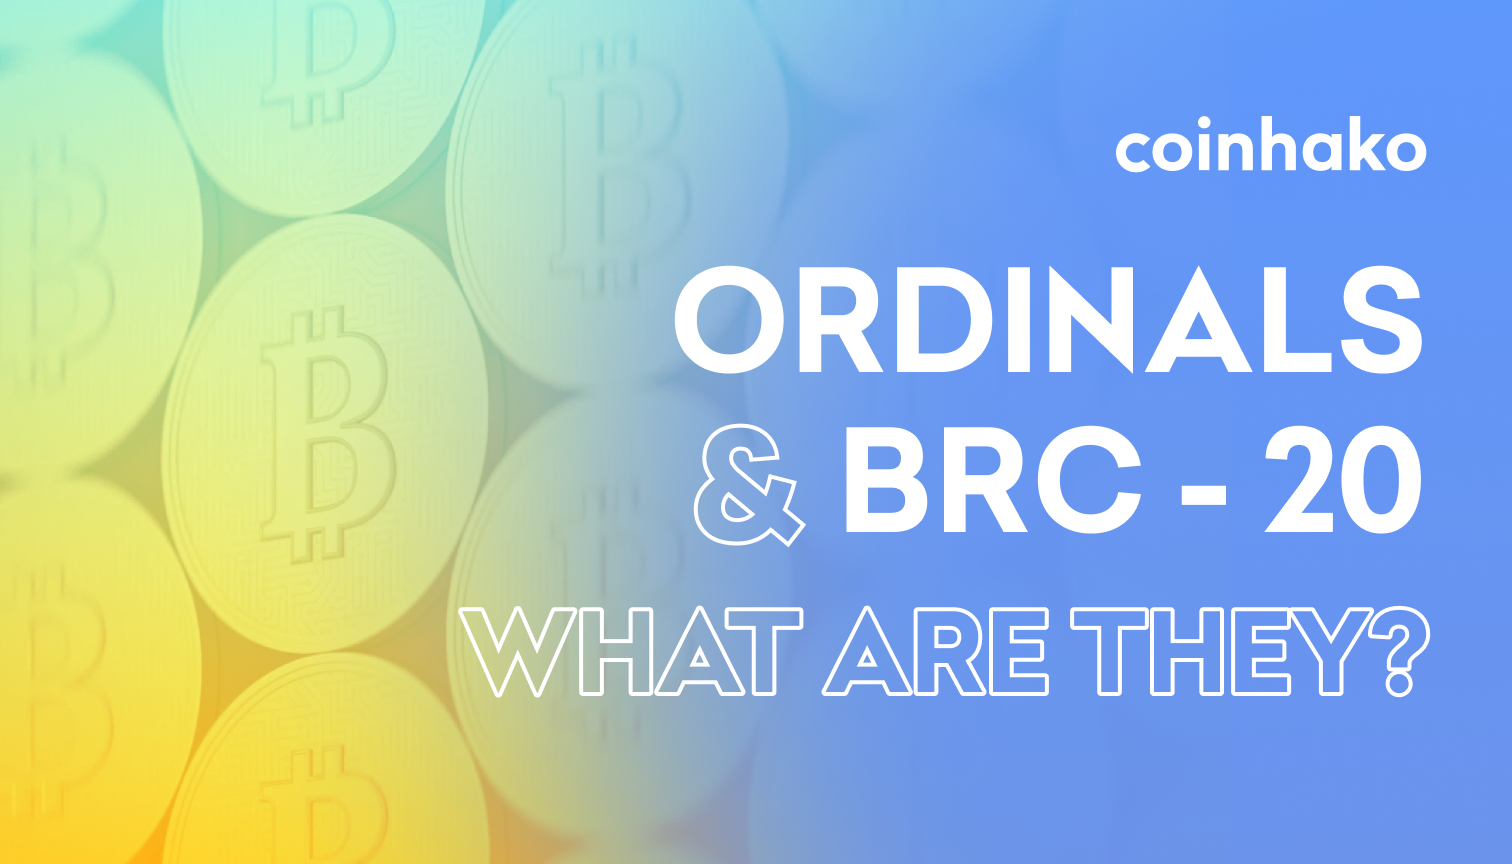 Ordinals & BRC-20: What Are They?